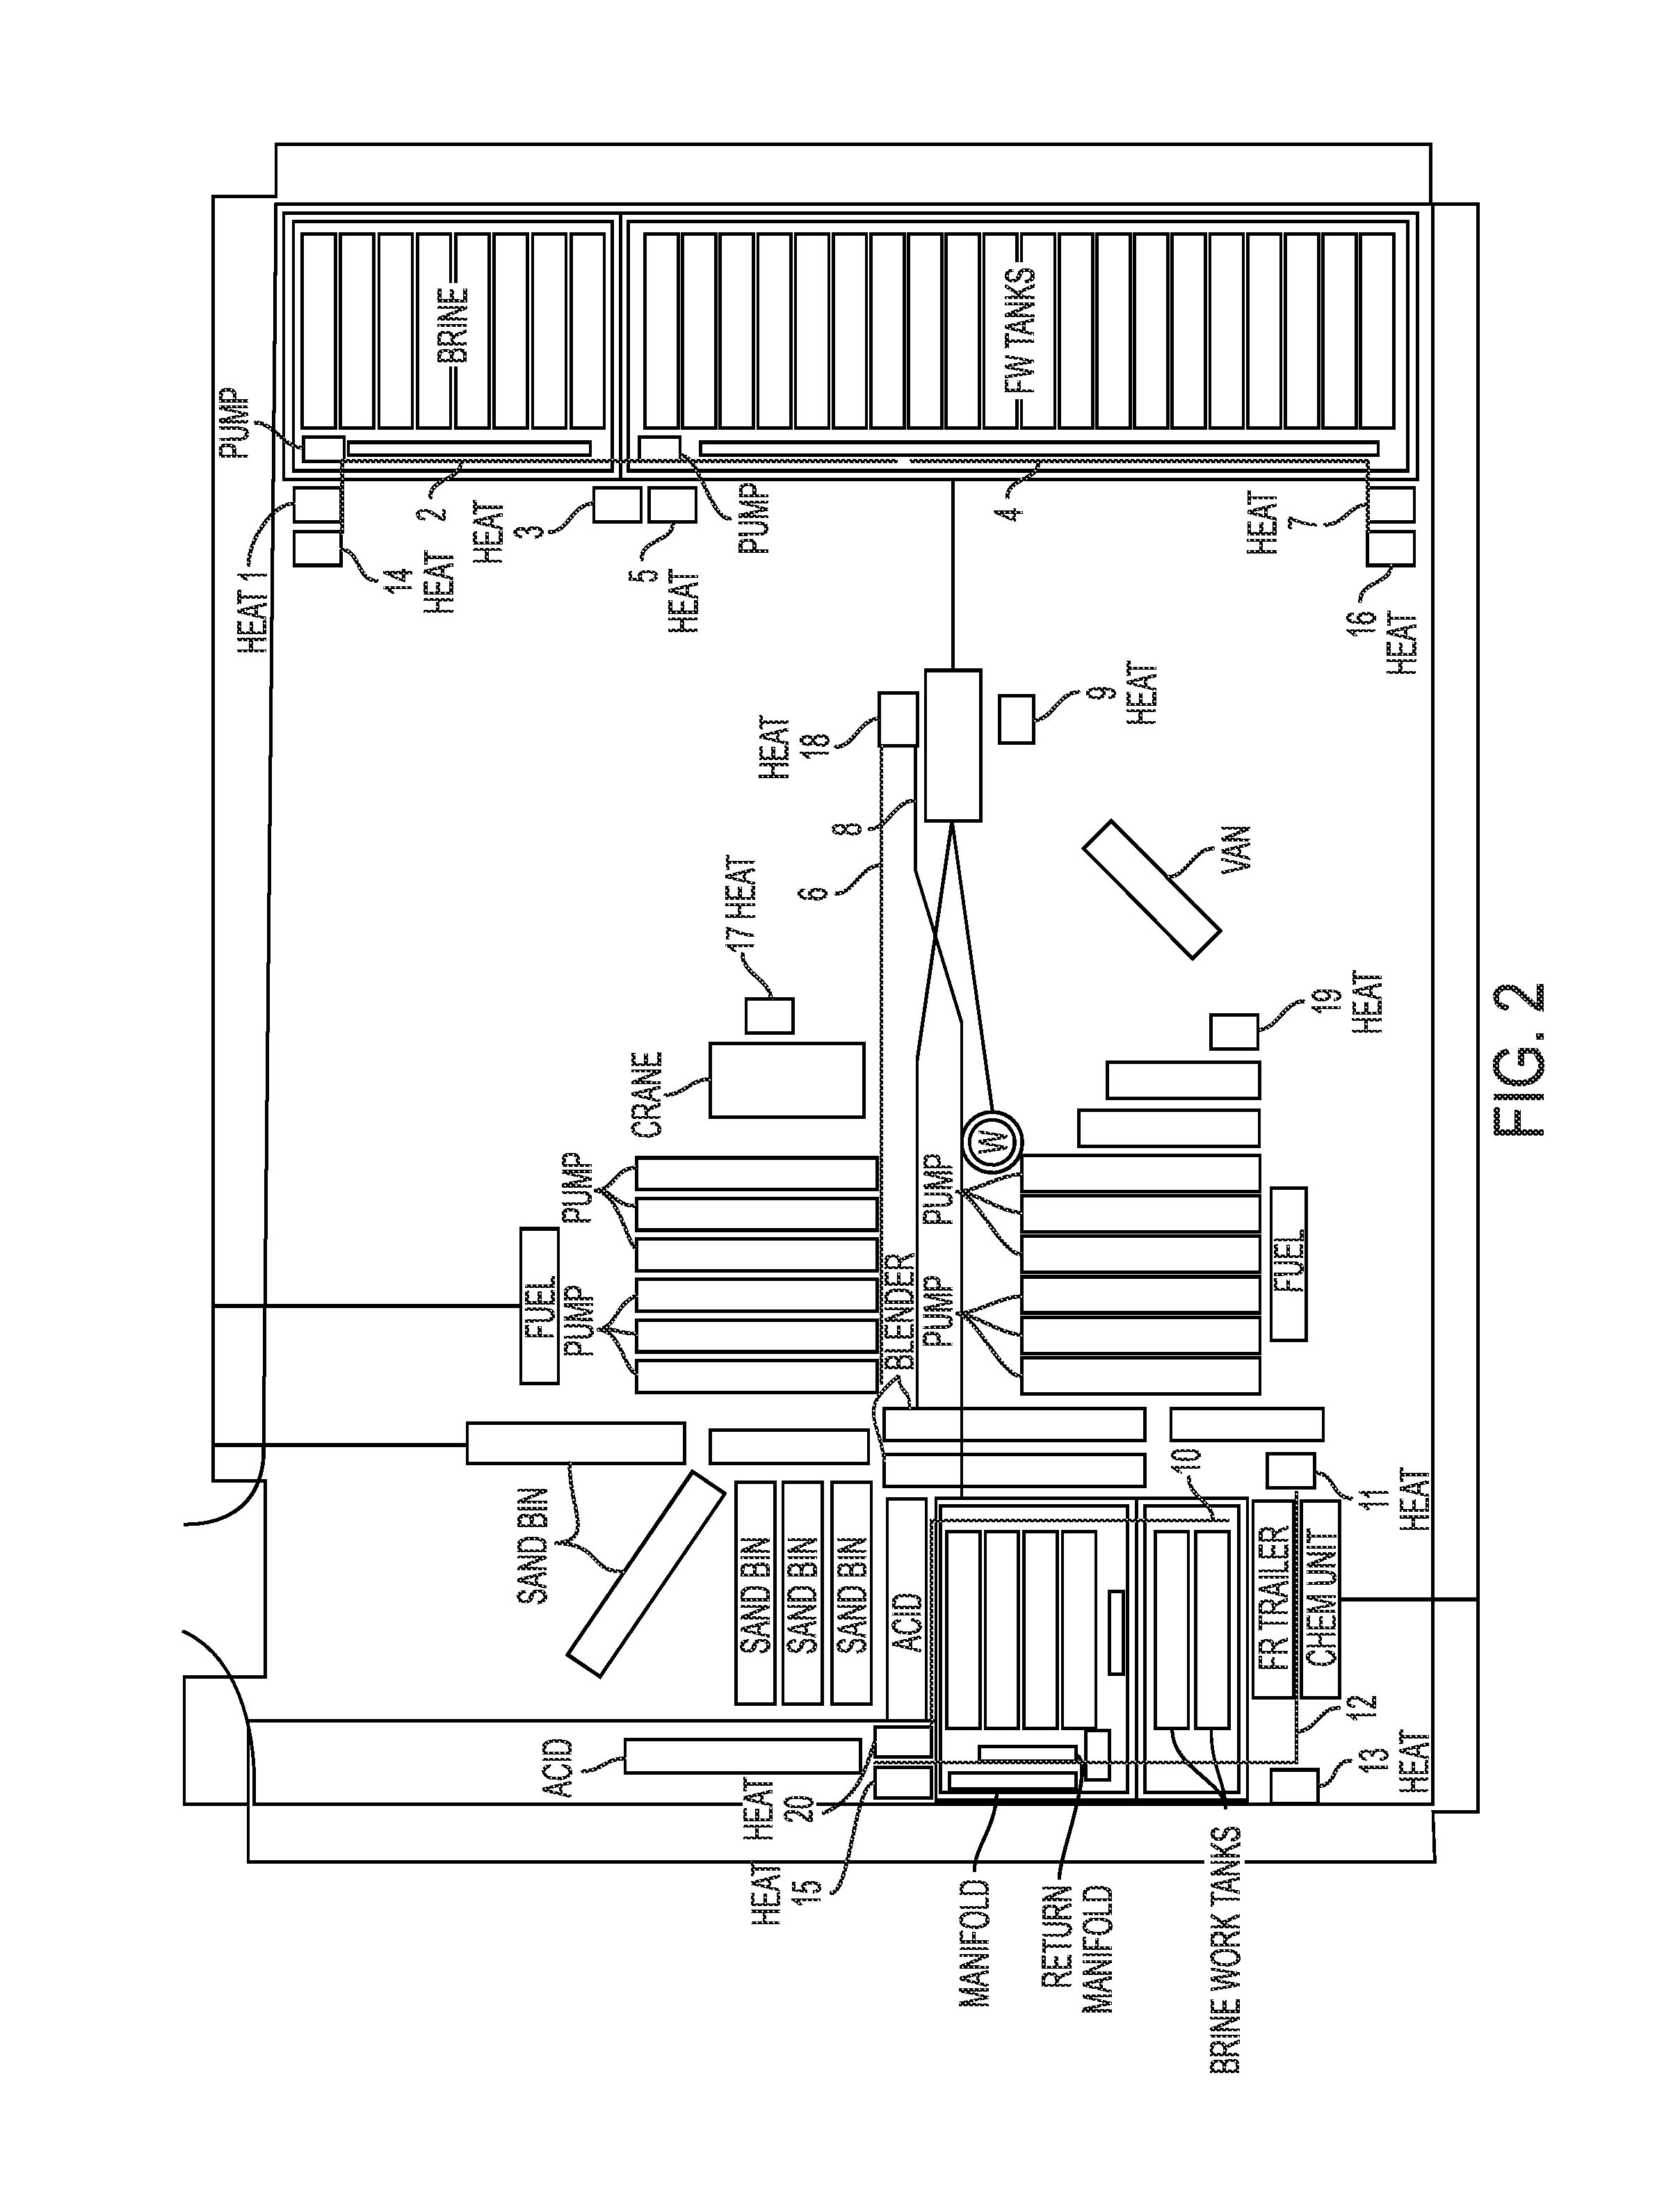 Mobile Heat Dispersion Apparatus and Process